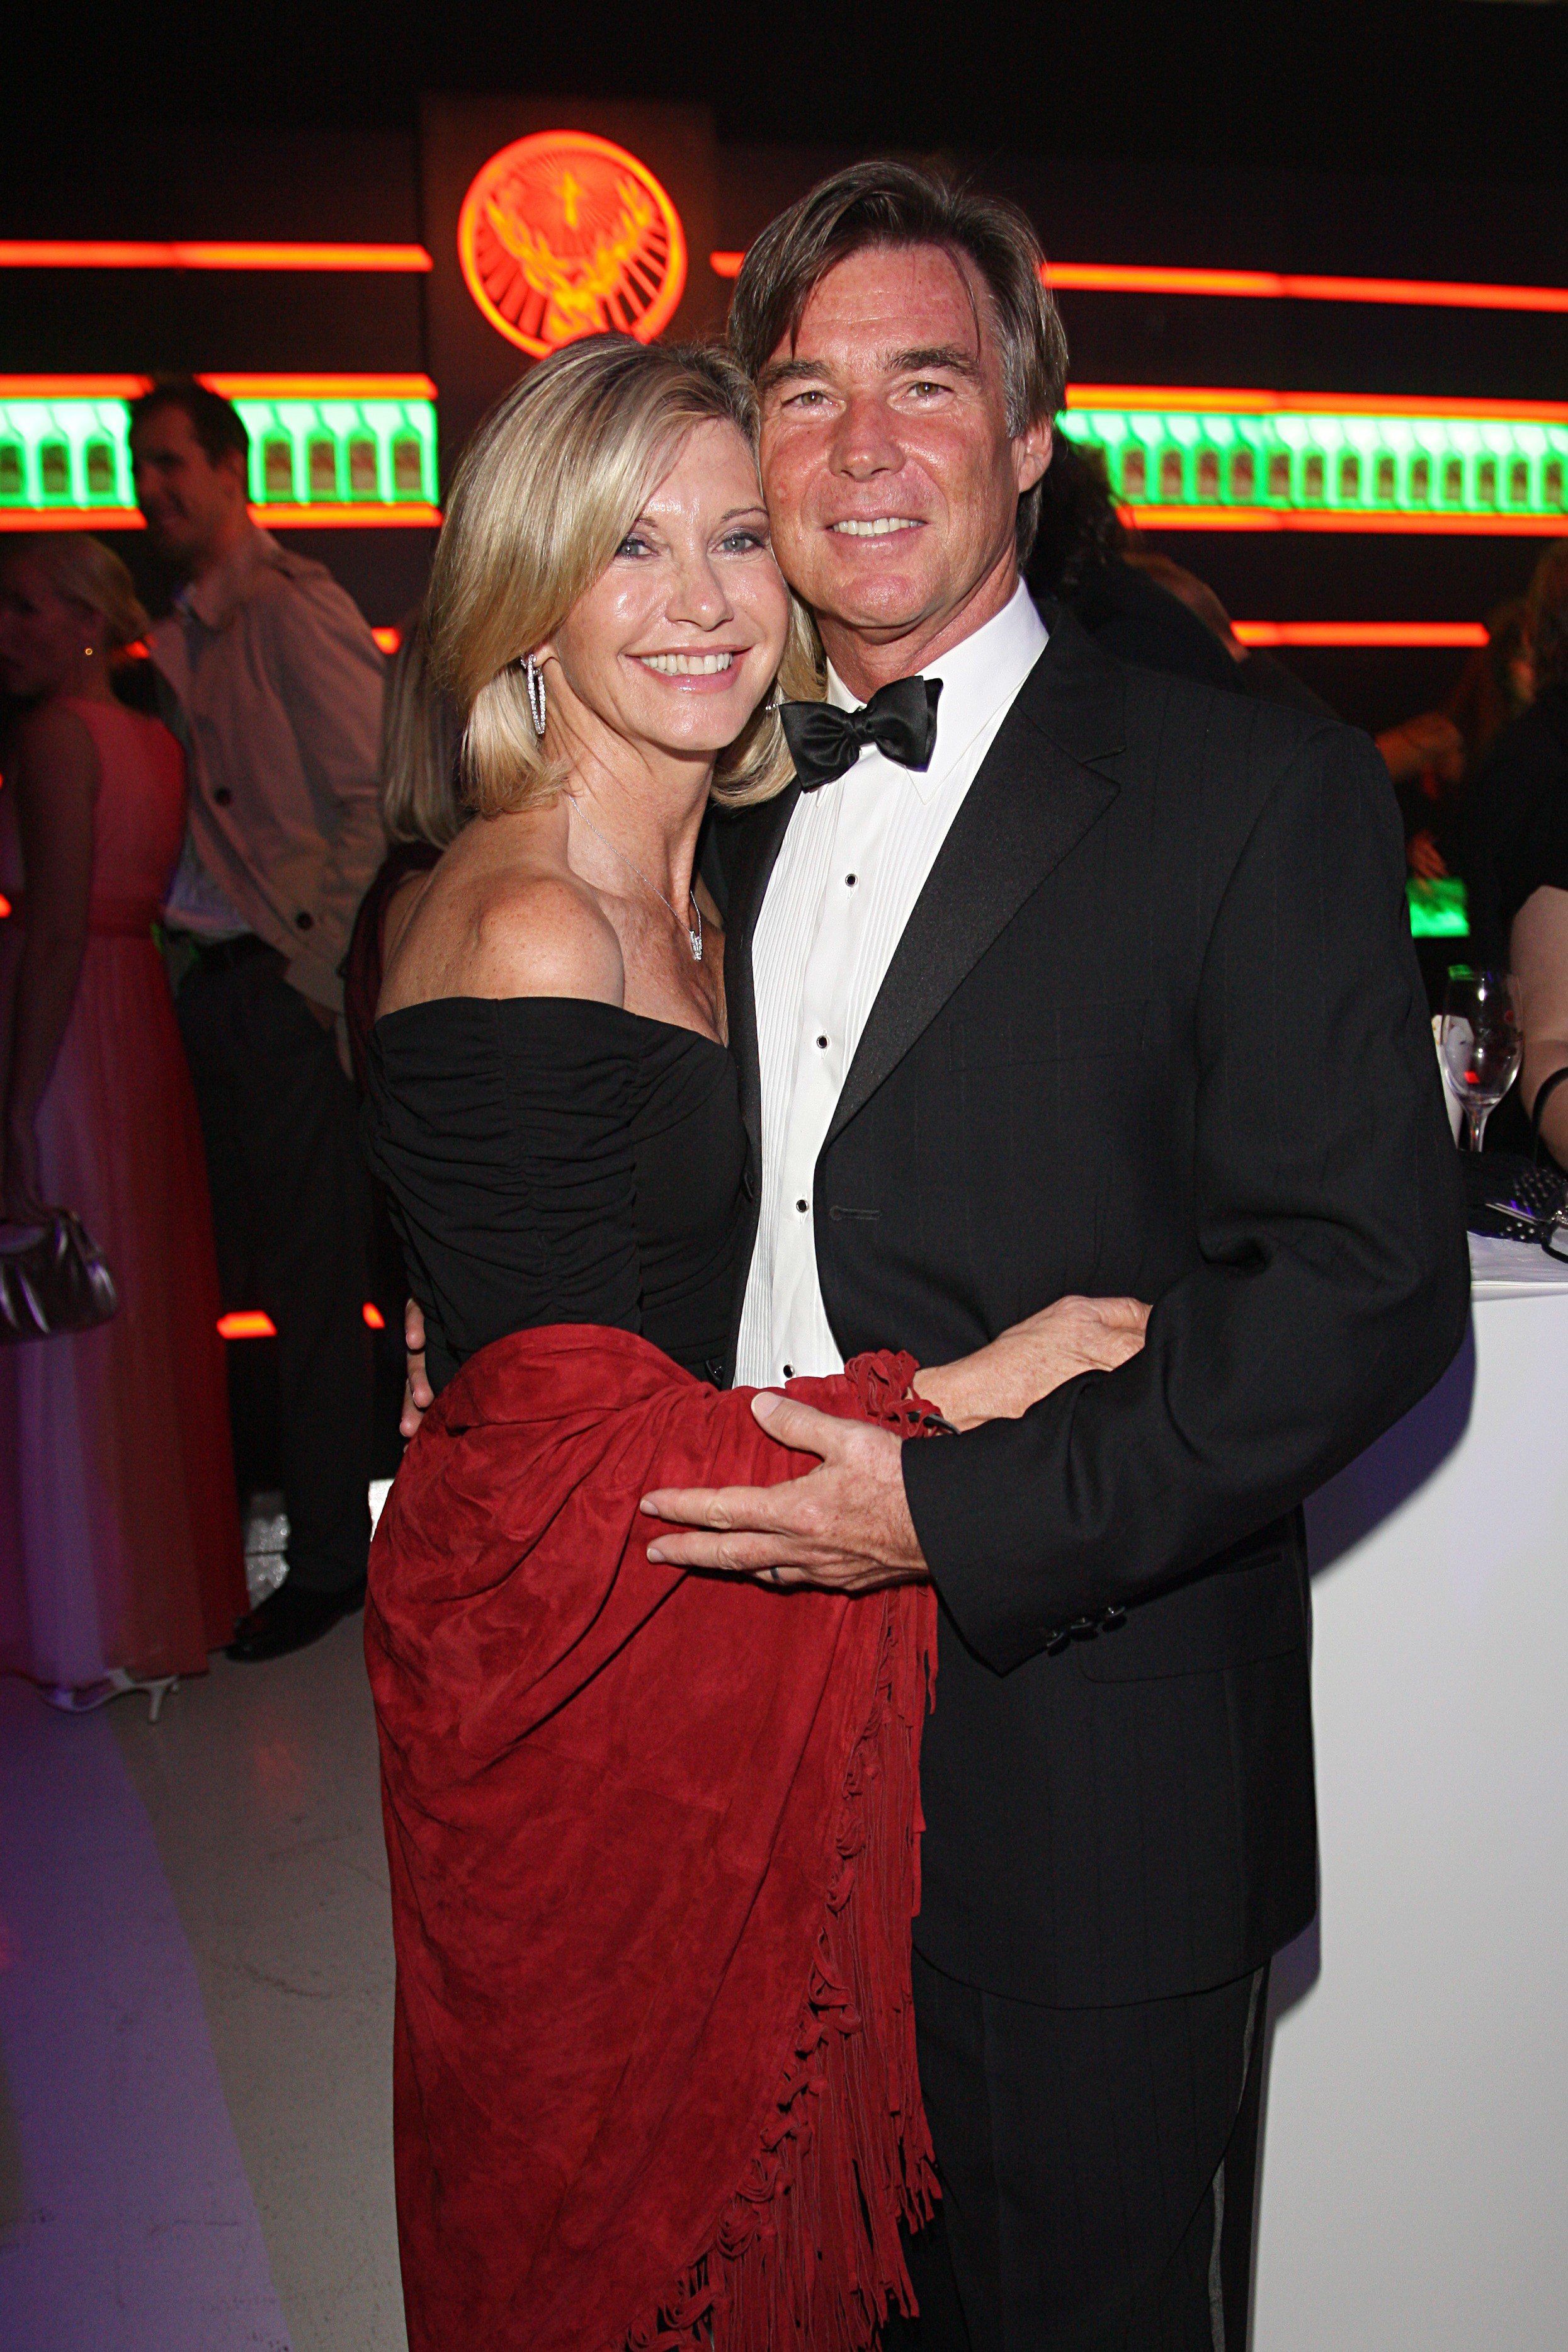 Olivia Newton-John and John Easterling at the "Tribute To Bambi" benefit in Berlin on October 9, 2009. | Source: Getty Images